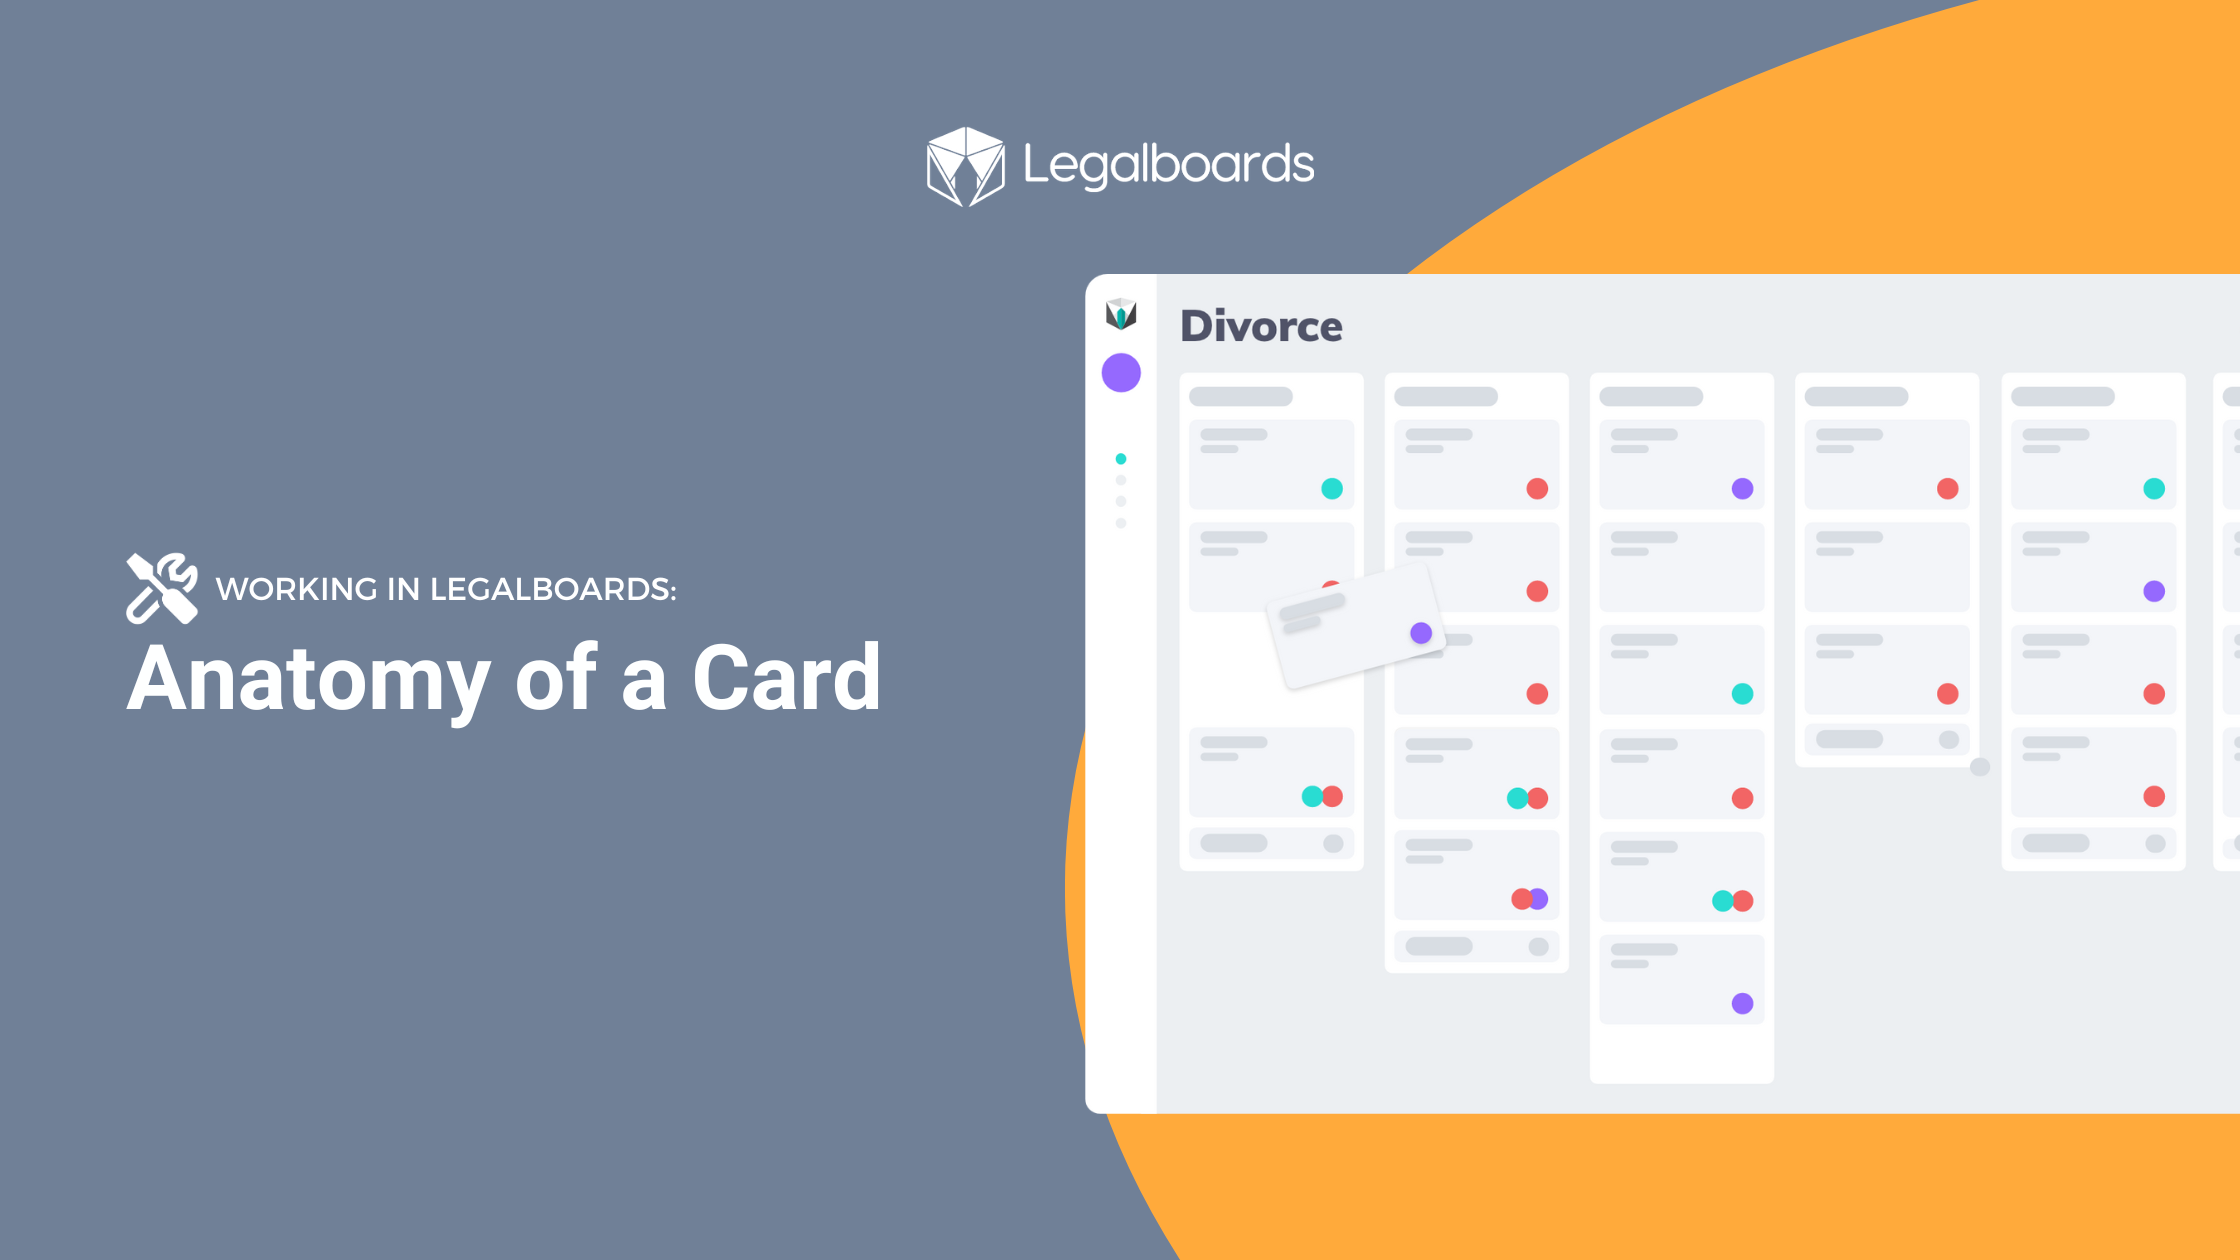 Working in Legalboards: Anatomy of a Card